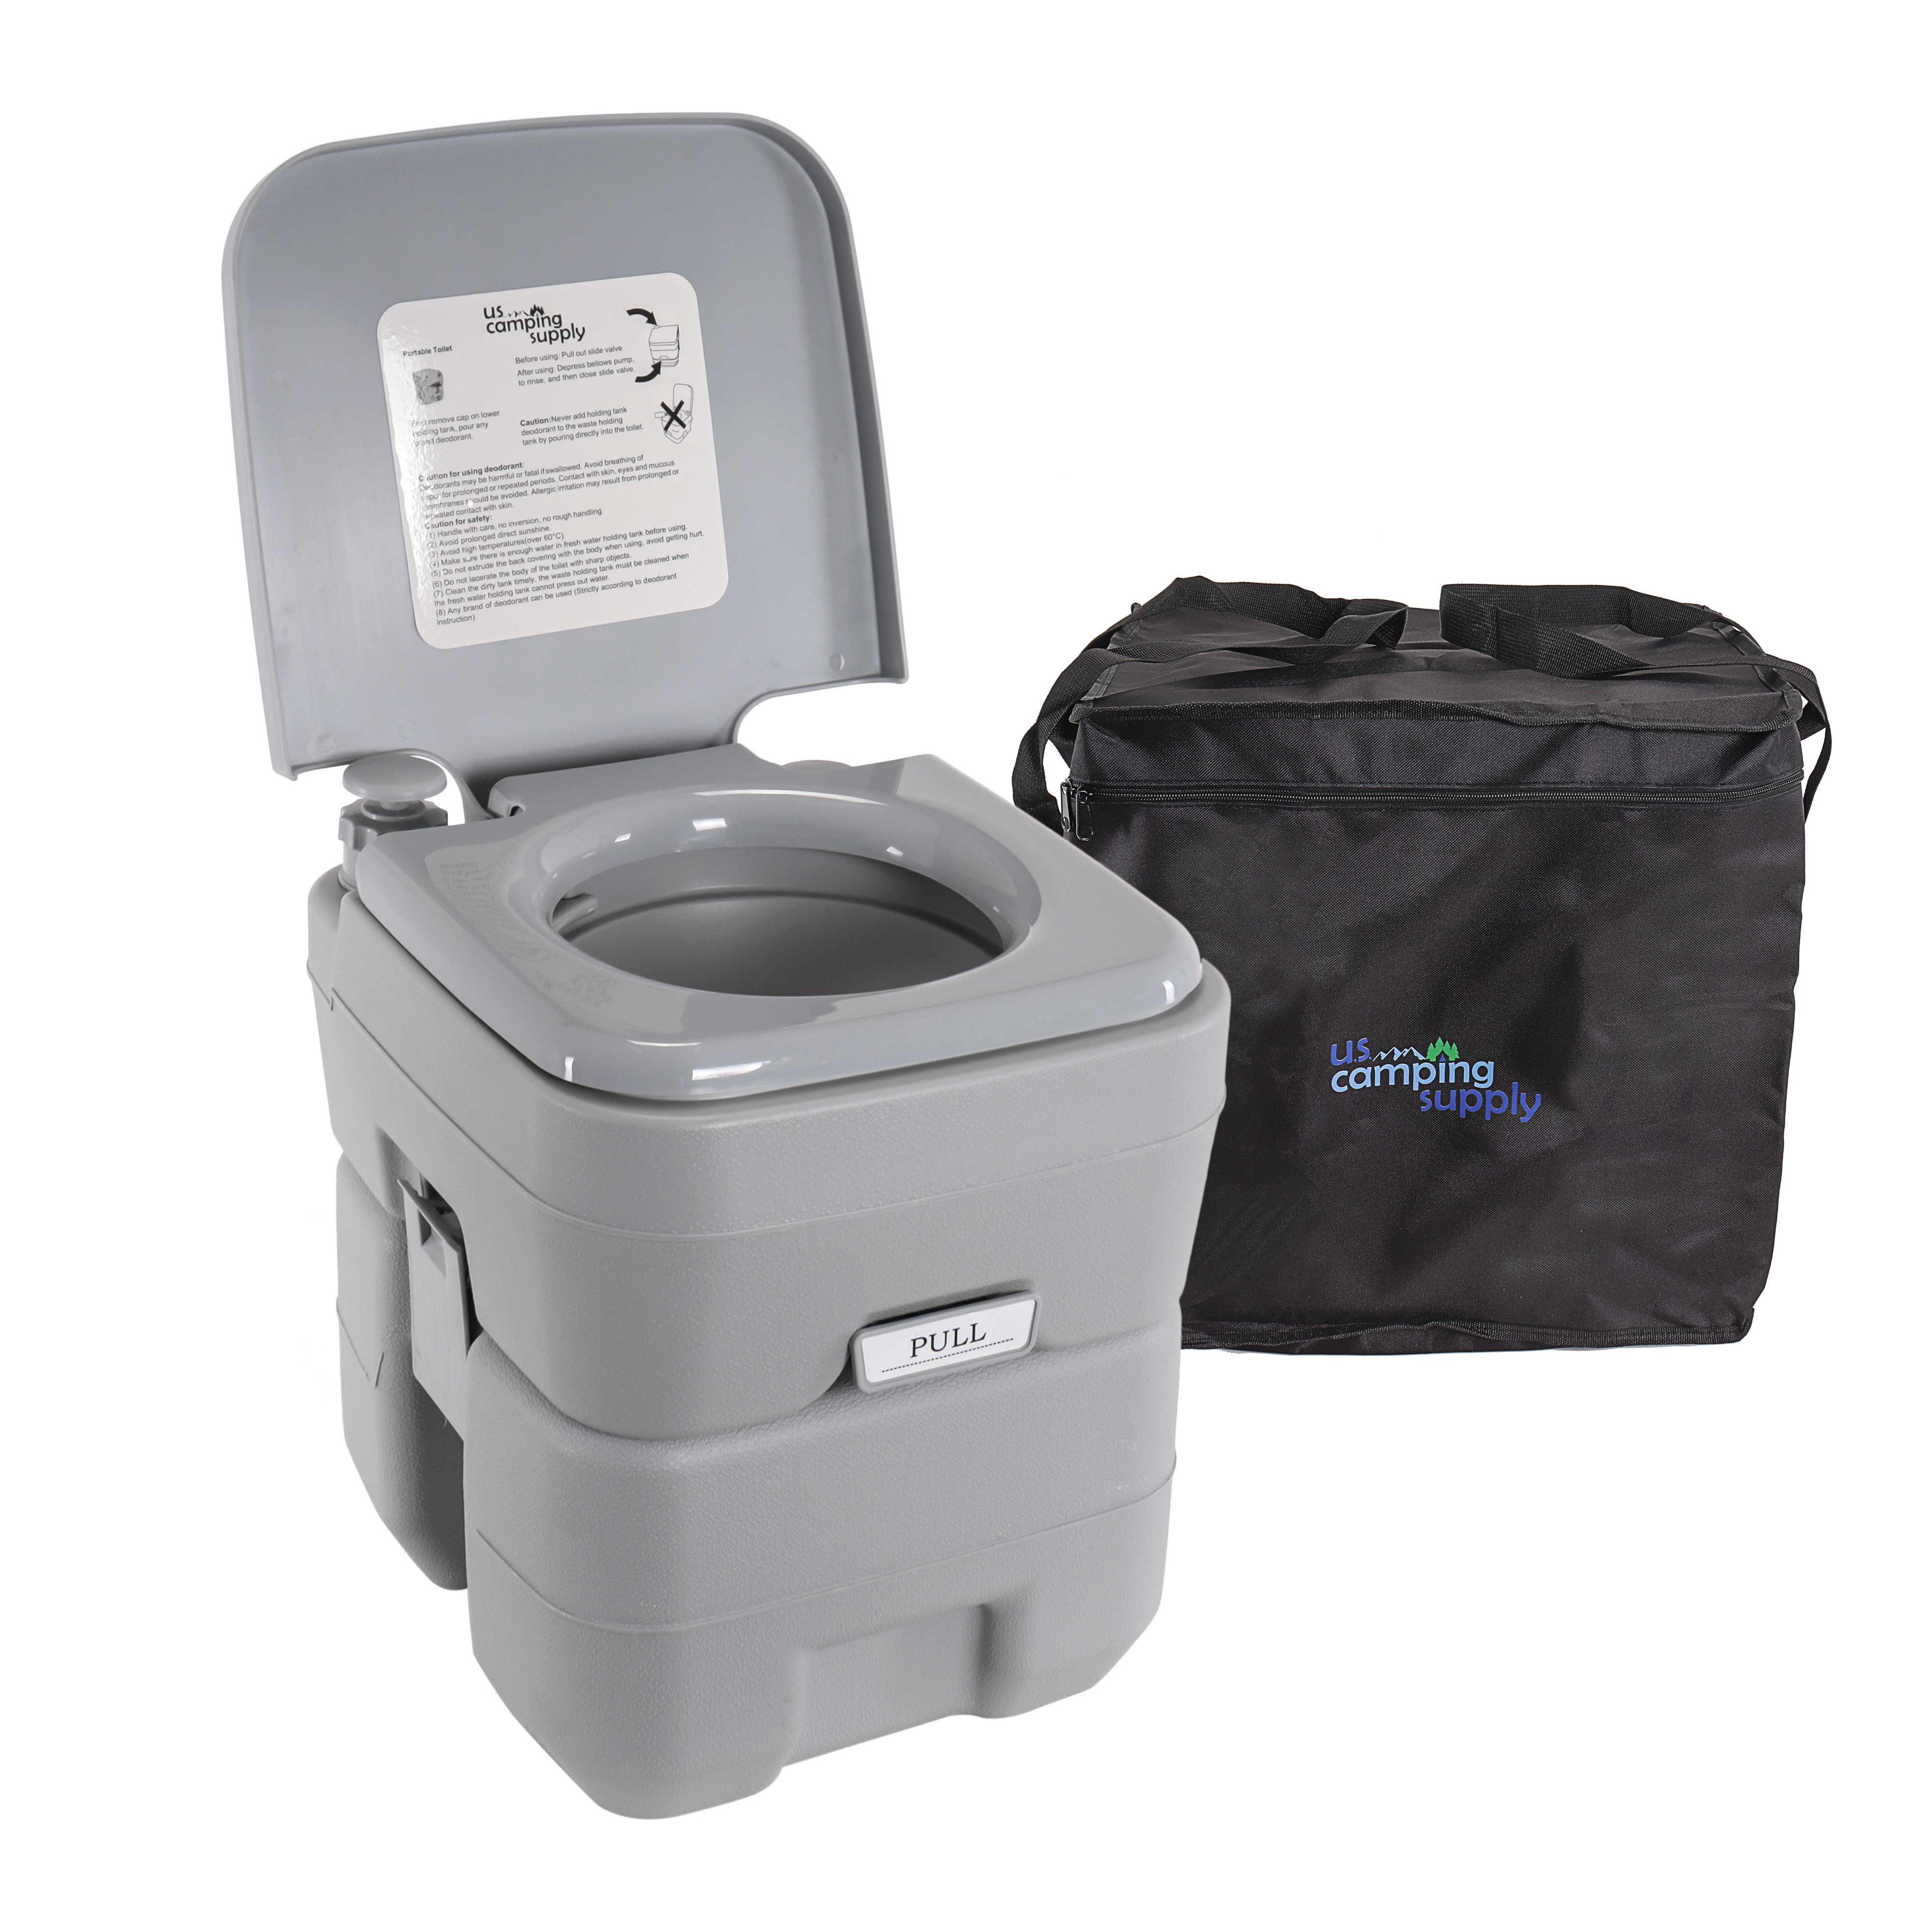 vliegtuigen temperatuur Tragisch U.S. Camping Supply Portable Toilet with Carry Bag, 5.3 Gallon Waste Tank -  Compact Indoor Outdoor Dual Outlet Commode - Travel, Camping, RV, Boating,  Fishing - Traveling Bathroom, Water Flush Pump - Walmart.com